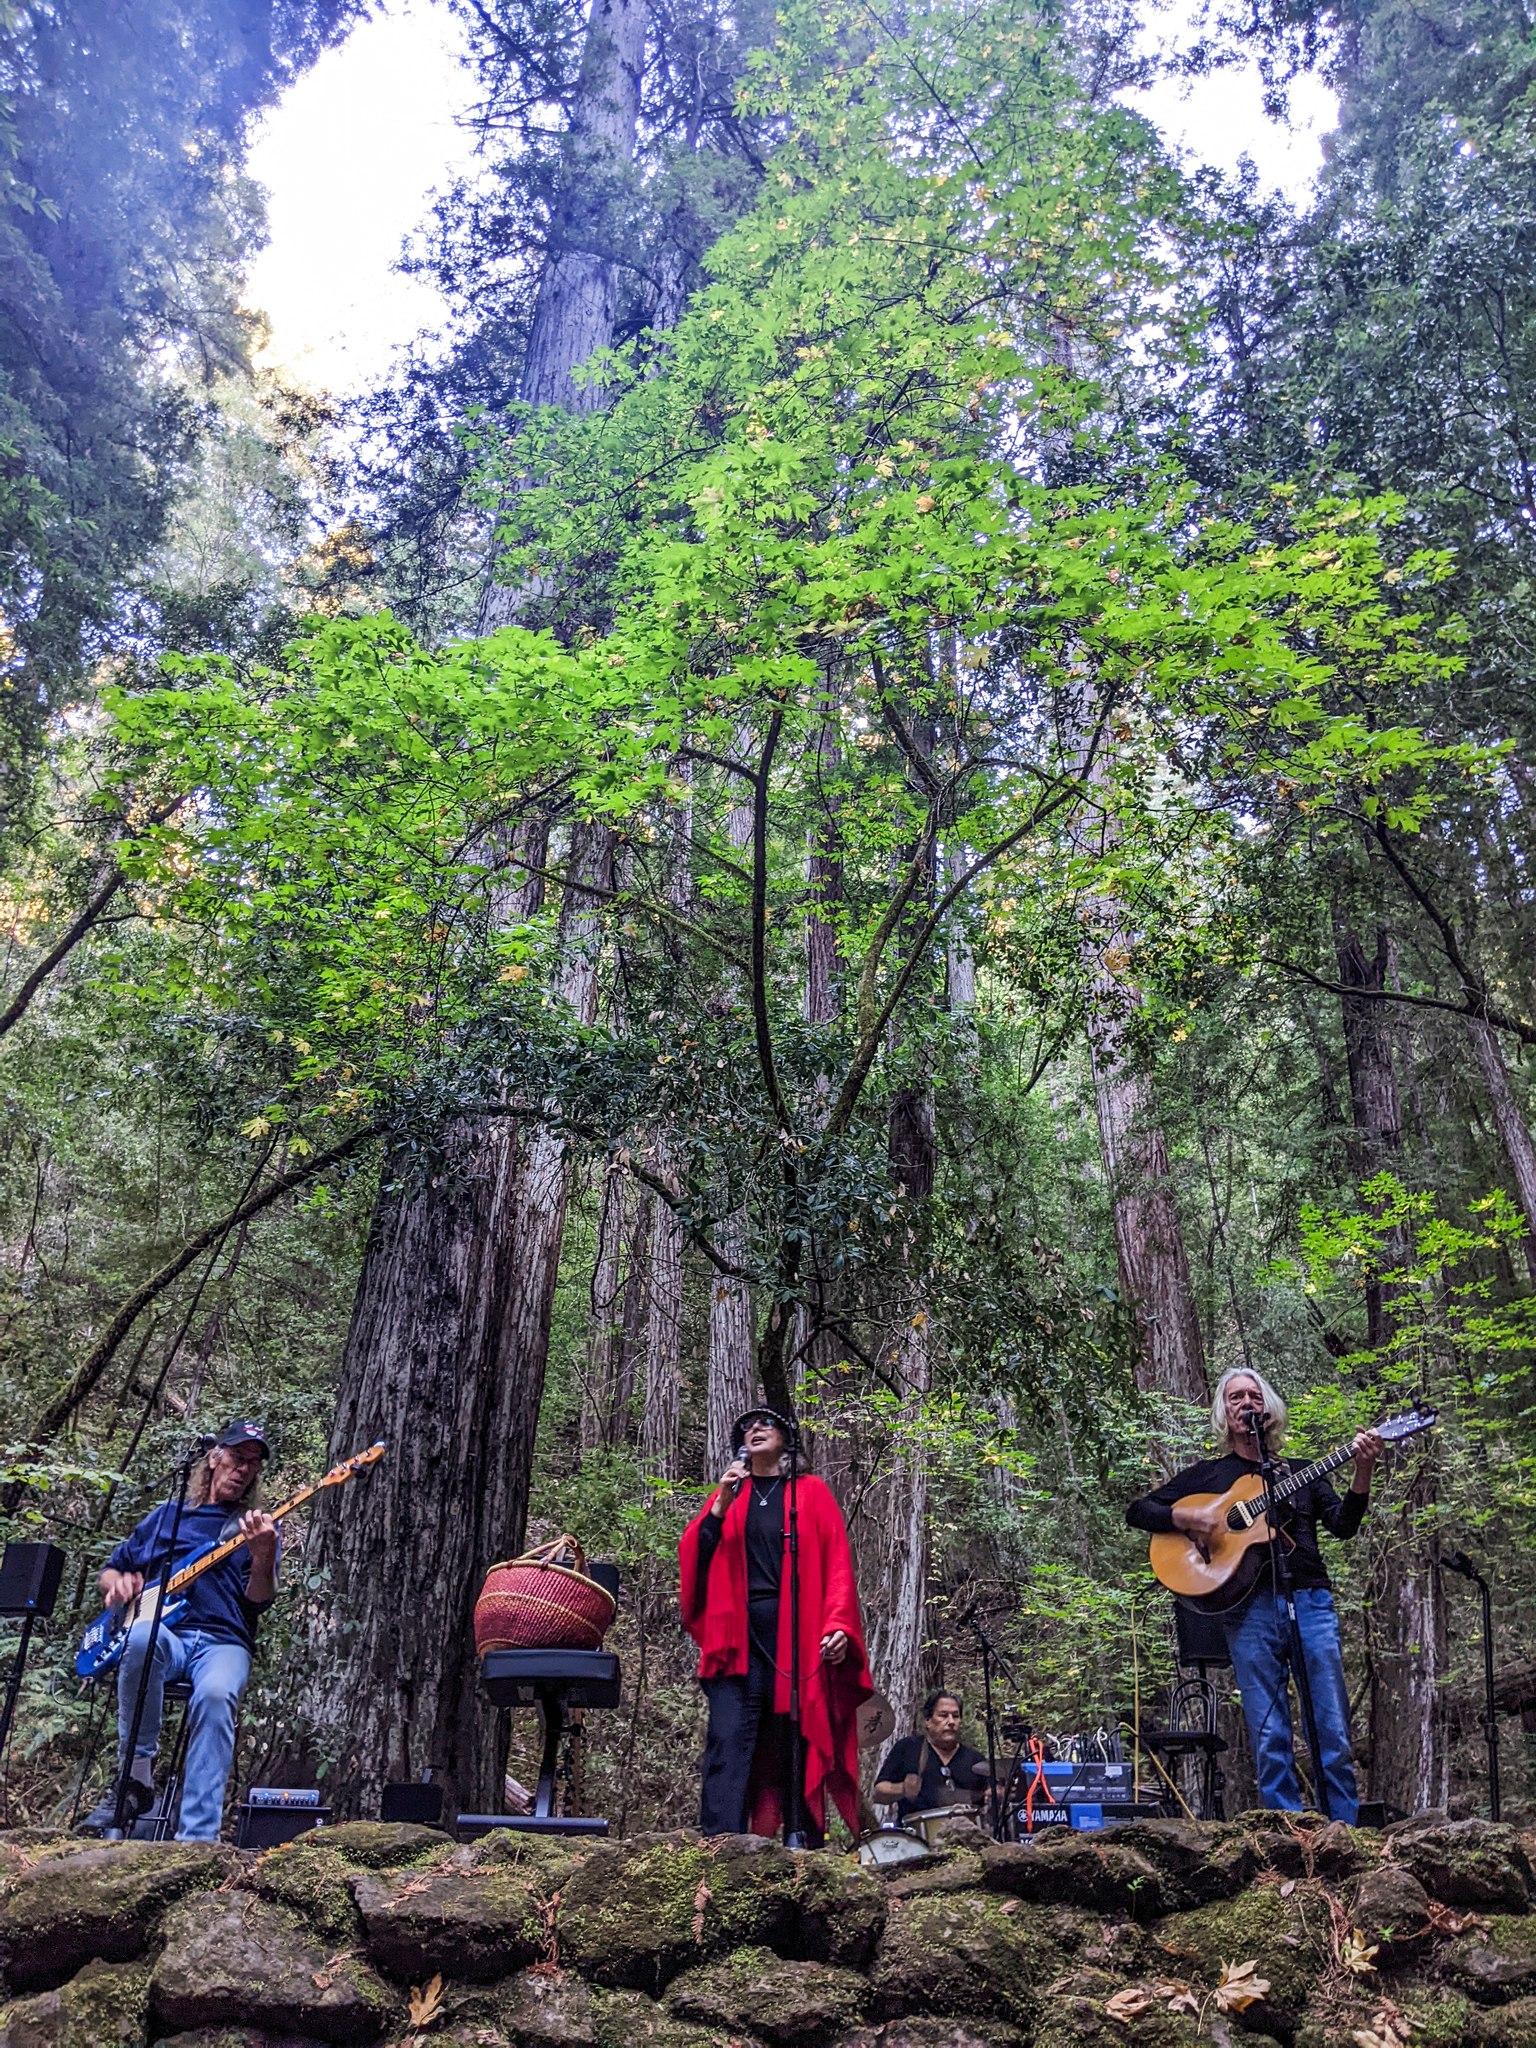 Under tall green trees, four musicians stand on a natural stage on a rock wall. They are dressed casually and comfortably. The bass player on the left has a blue electric bass and is involved in playing. The central figure is the singer, holding a microphone and wearing a red cape. Just barely visible behind the red cape is the face of the drummer, concentrating. The last musician has an acoustic guitar and is standing at the microphone singing and playing.